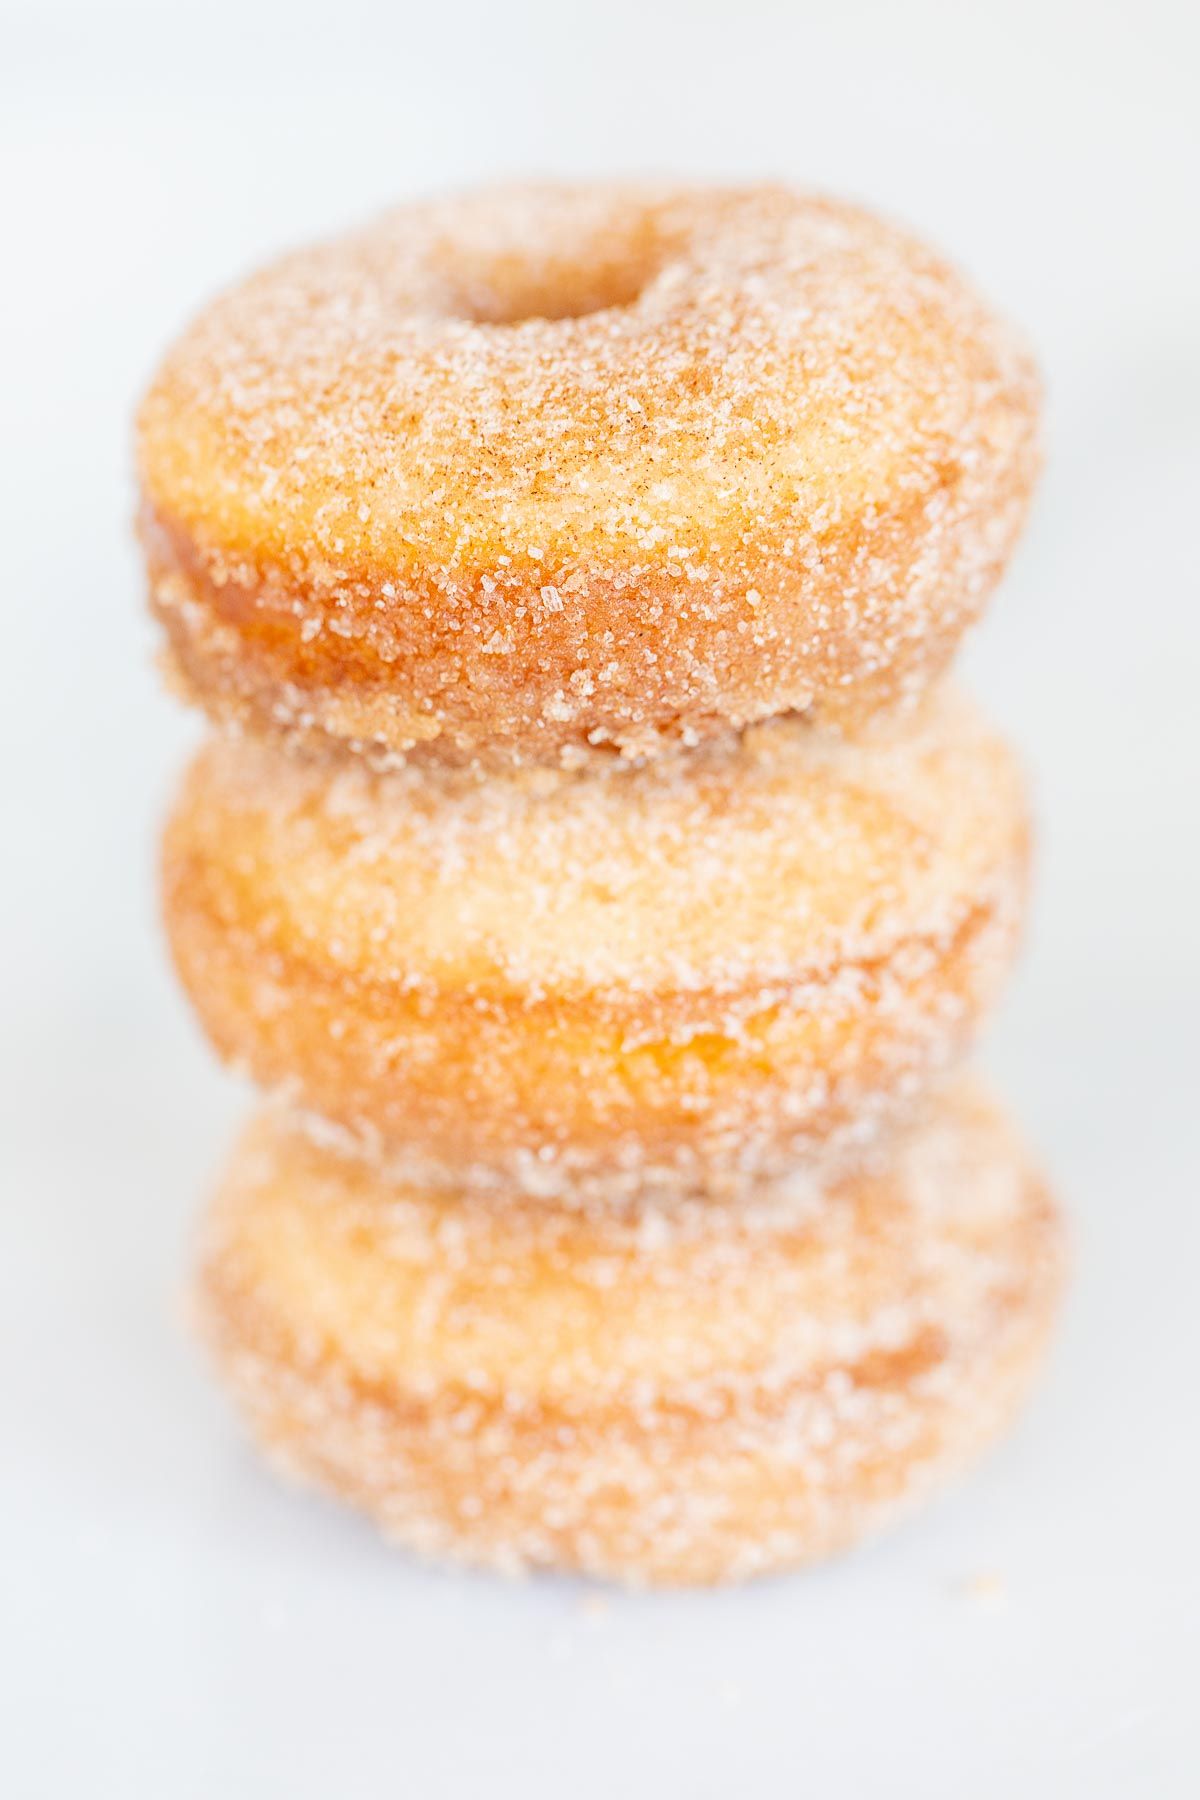 Cinnamon sugar donuts stacked on a marble countertop.